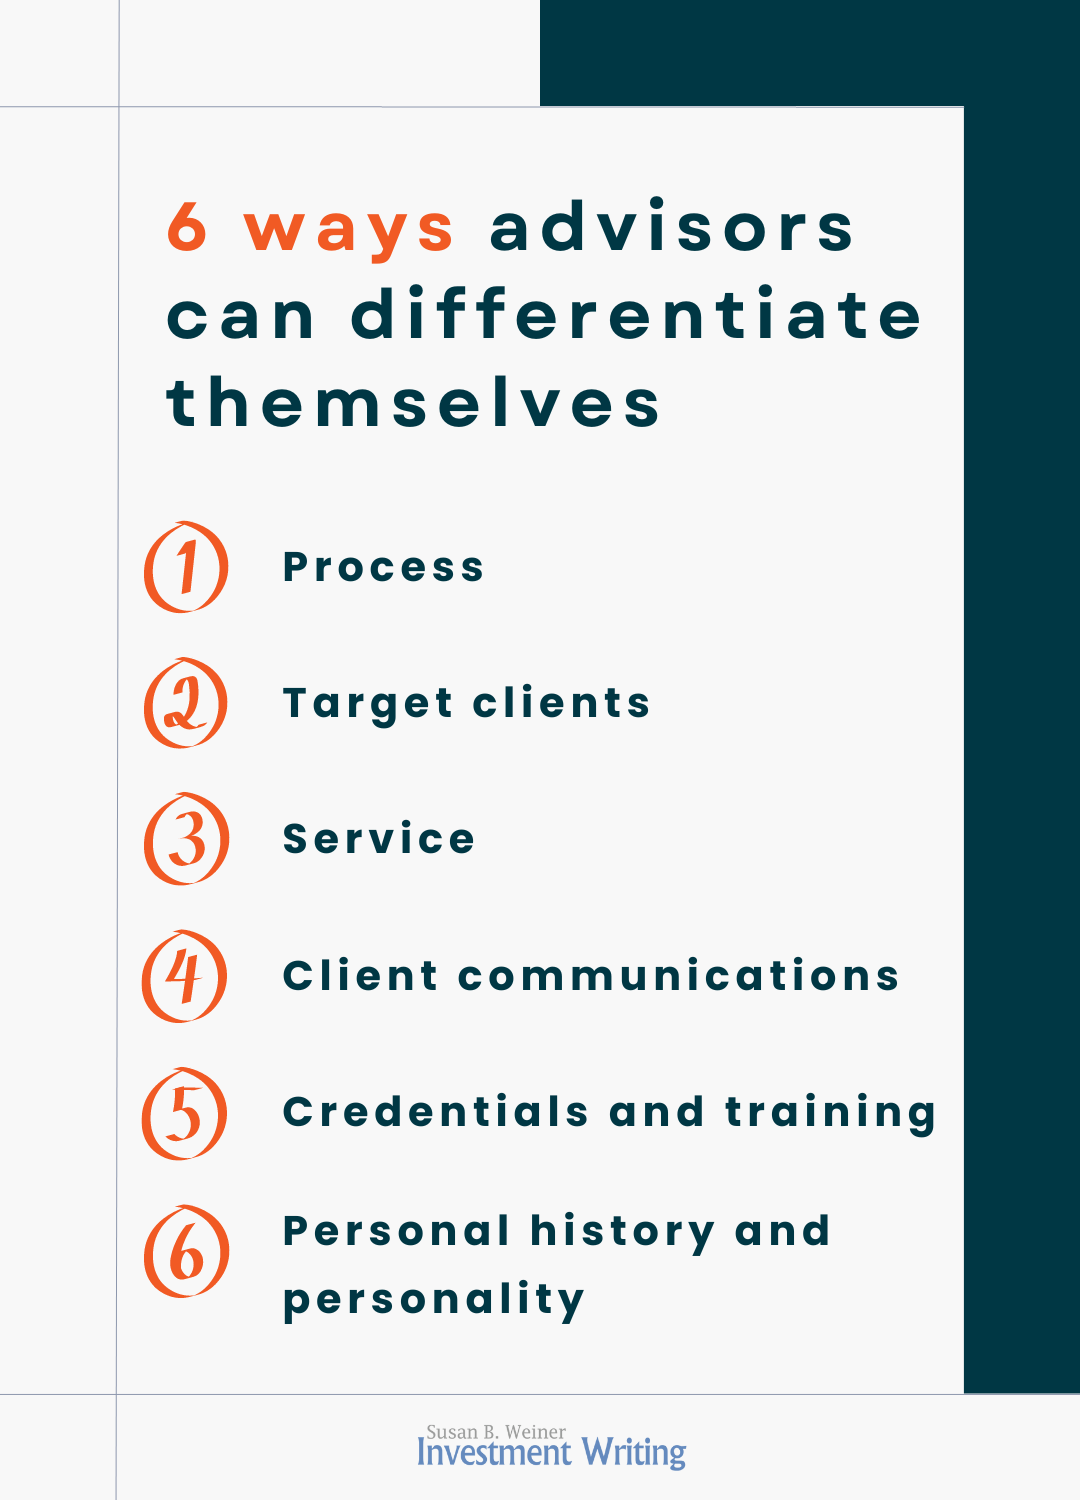 6 ways advisors can differentiate themselves infographic